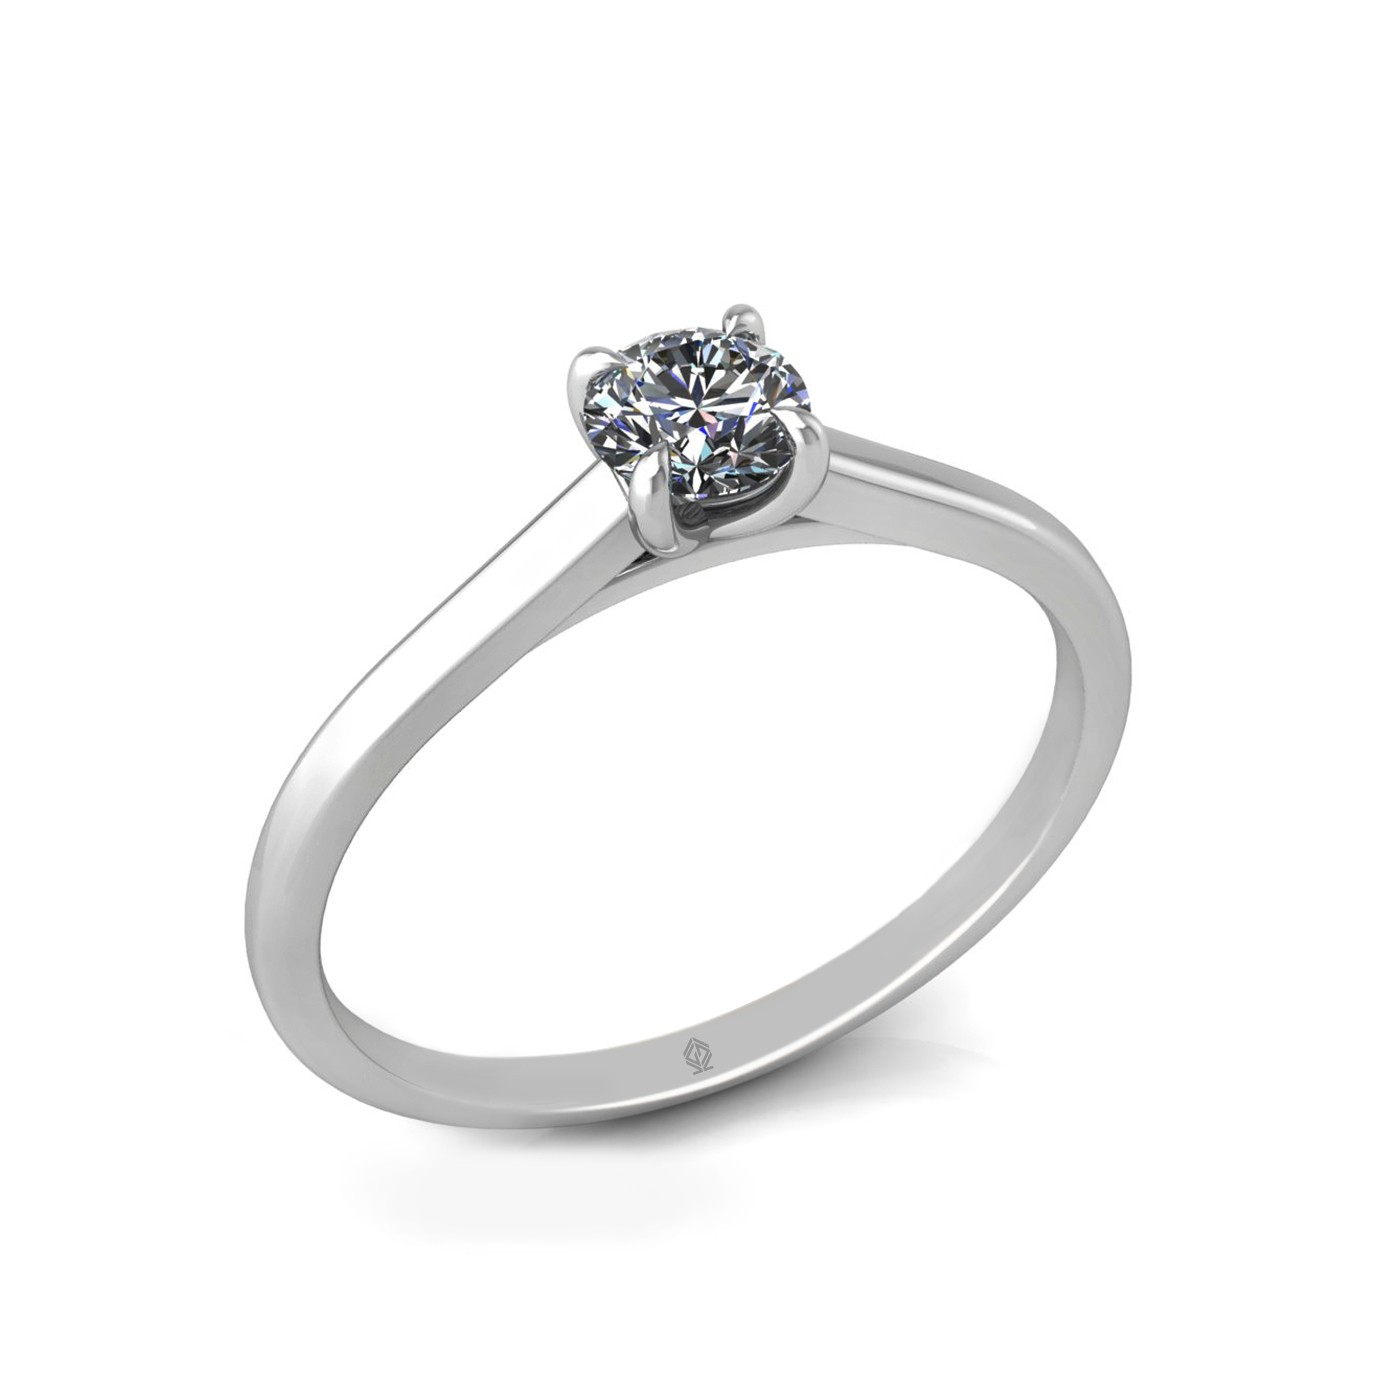 18k white gold  0,30 ct 4 prongs solitaire round cut diamond engagement ring with whisper thin band